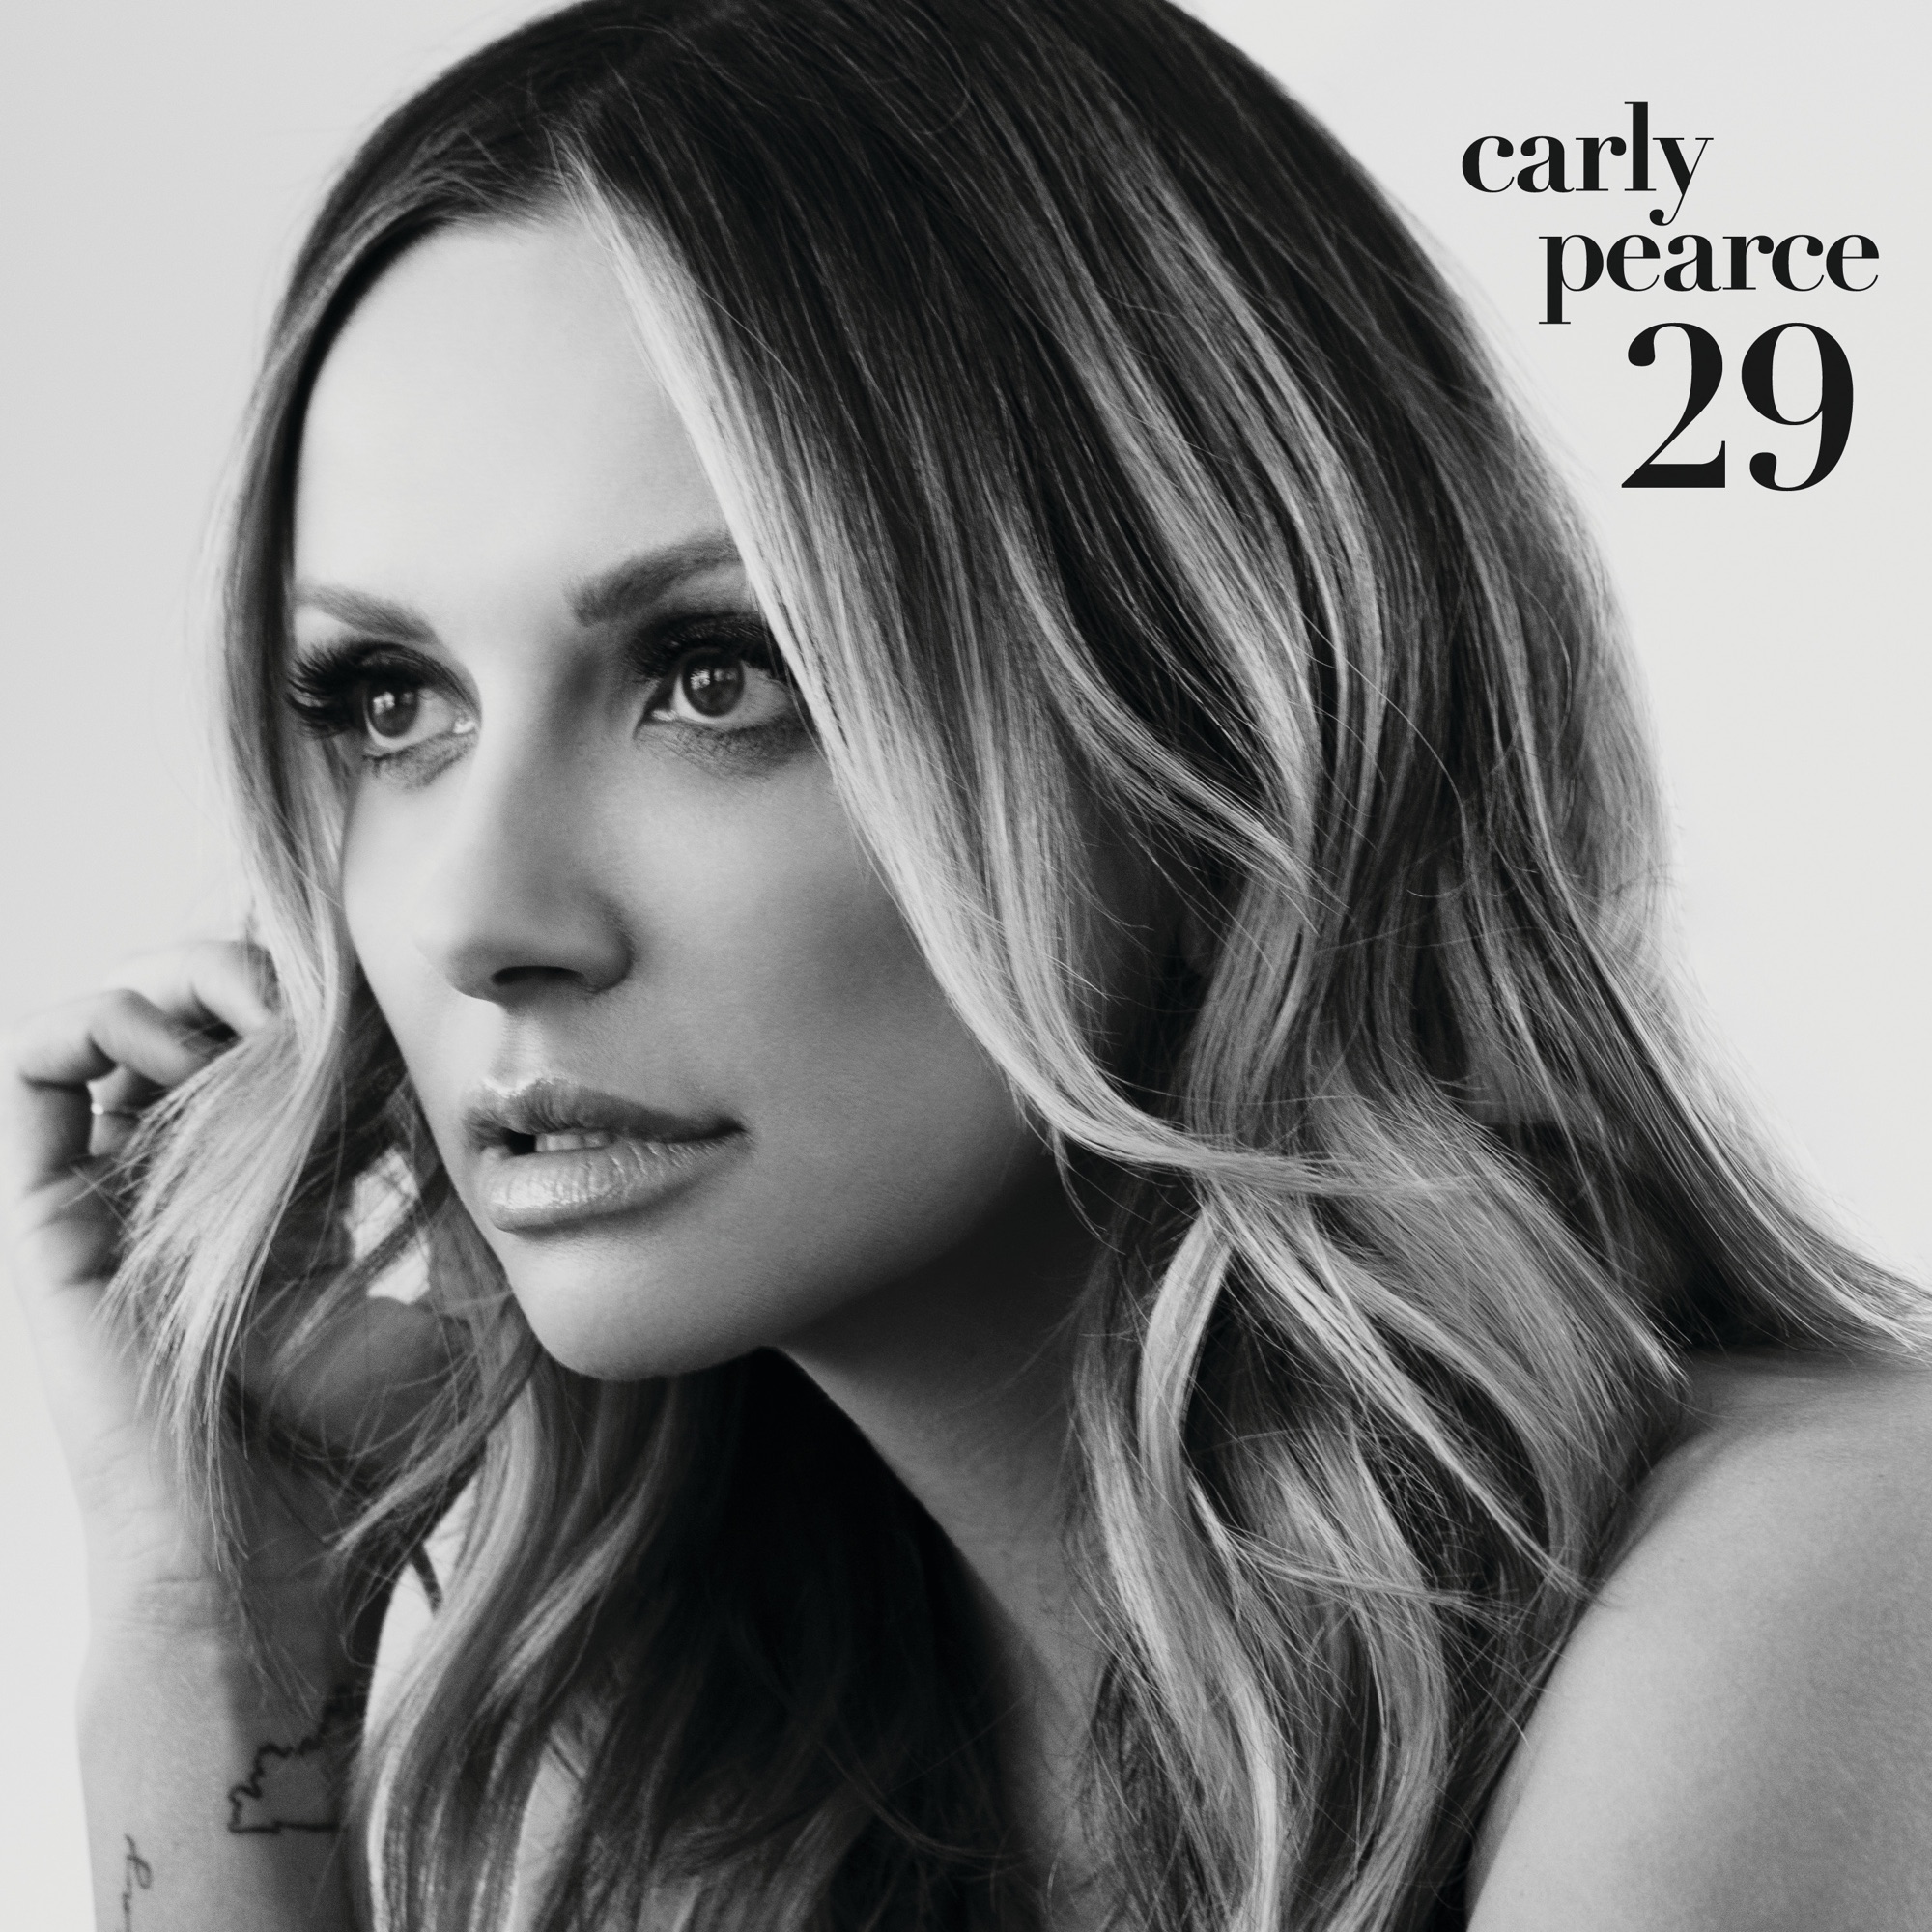 Carly Pearce - Should’ve Known Better - Single